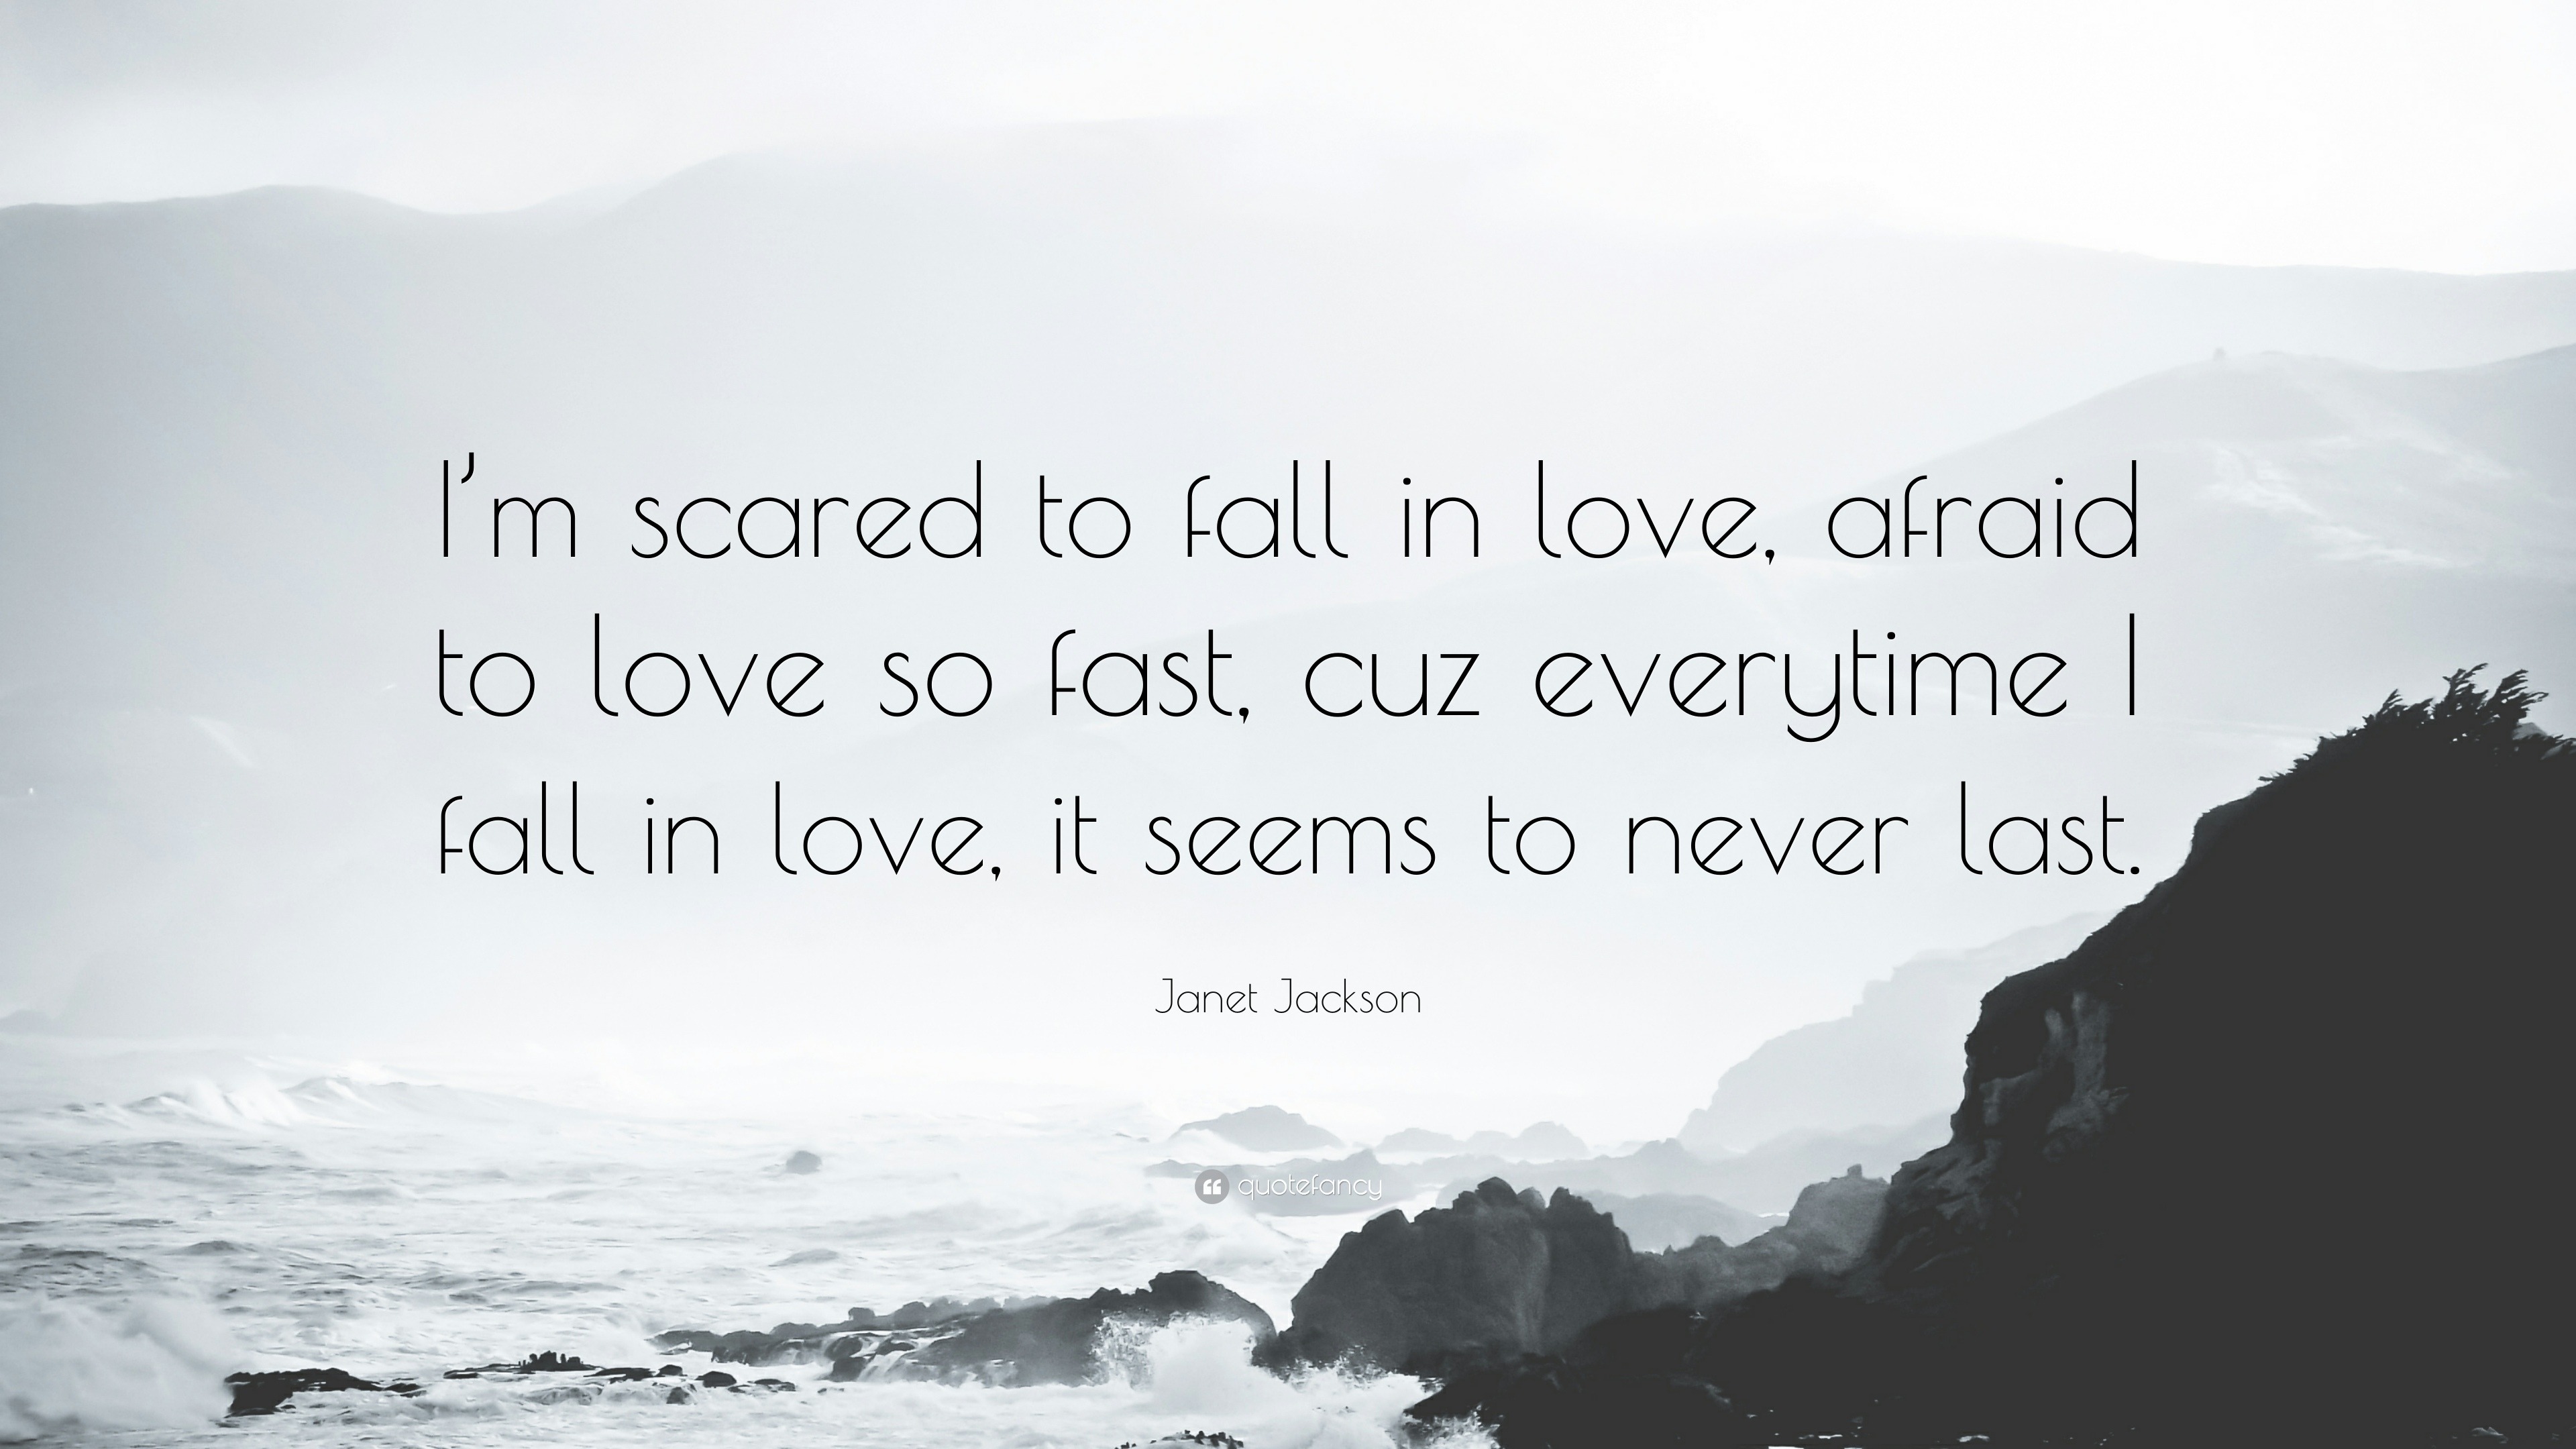 Janet Jackson Quote “I m scared to fall in love afraid to